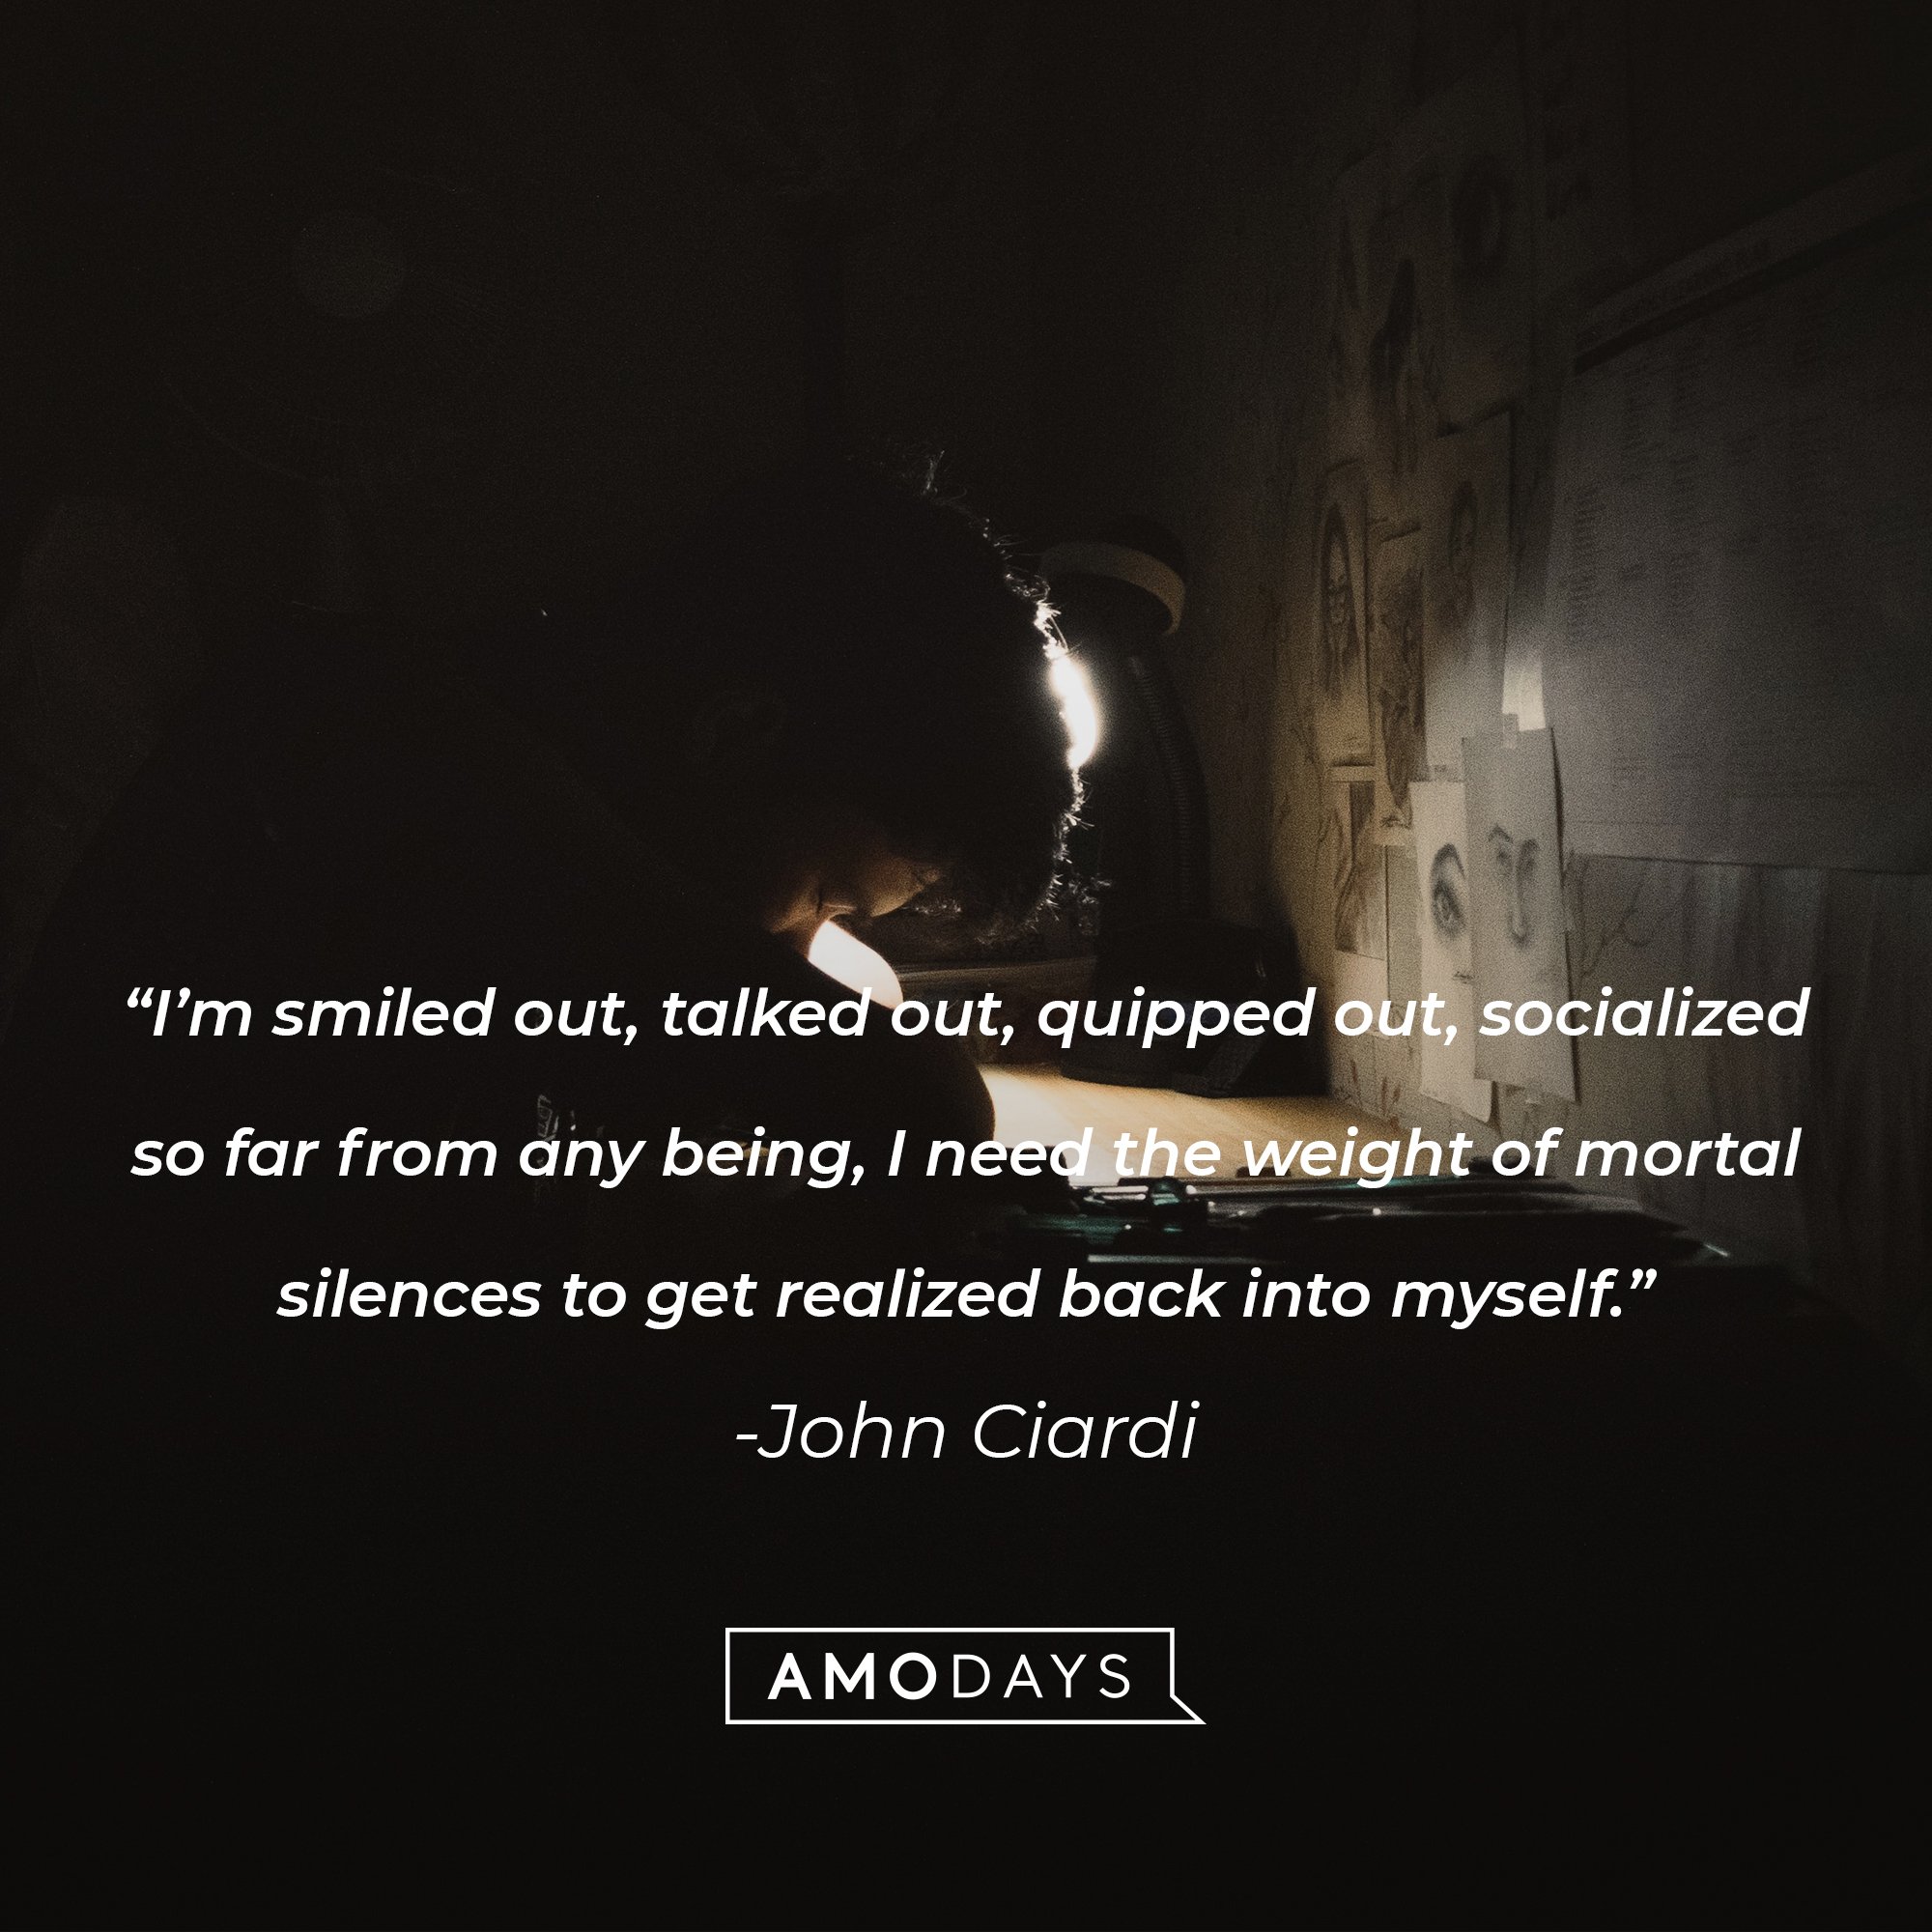 John Ciardi's quote: "I'm smiled out, talked out, quipped out, socialized so far from any being, I need the weight of mortal silences to get realized back into myself." | Image: AmoDays